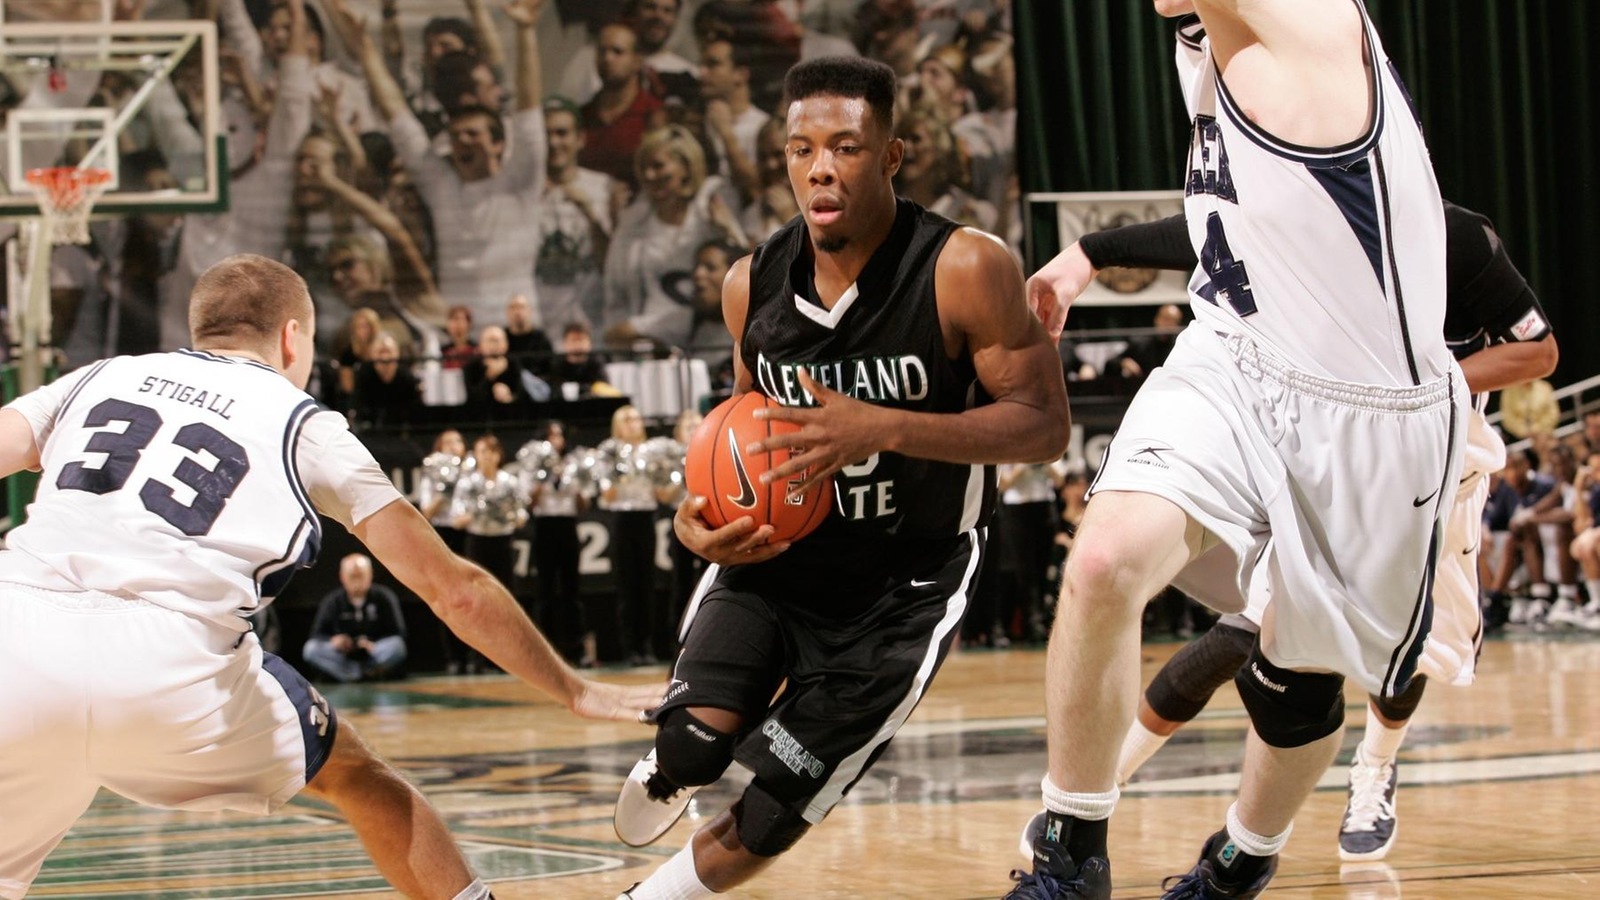 Norris Cole in Consideration for Horizon League All-Decade Team